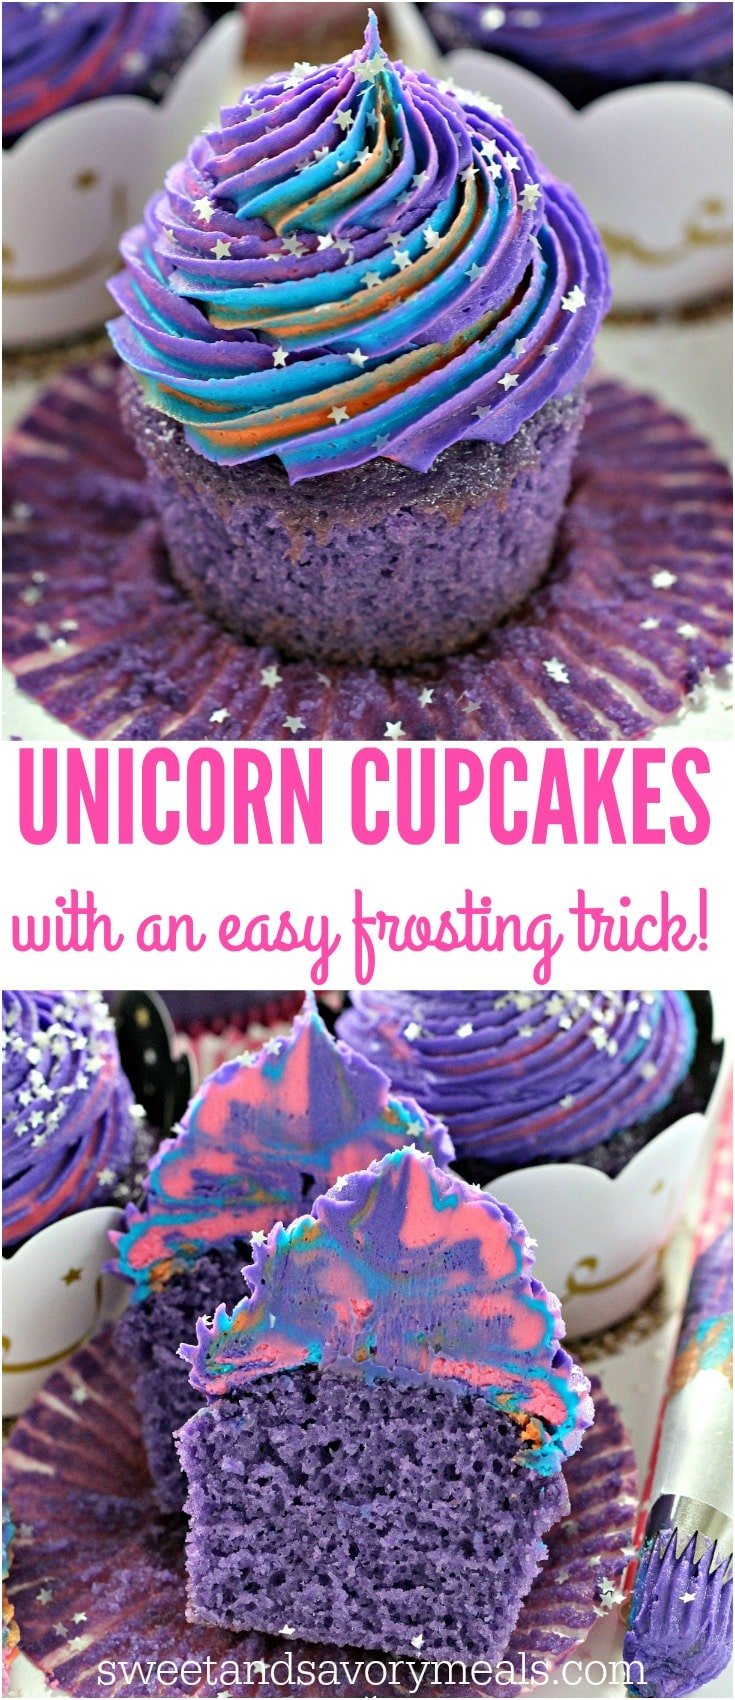 Unicorn Cupcakes are astonishingly pretty, delicious and also easy to make. Perfect for themed parties, these are meant to be a hit with everyone.